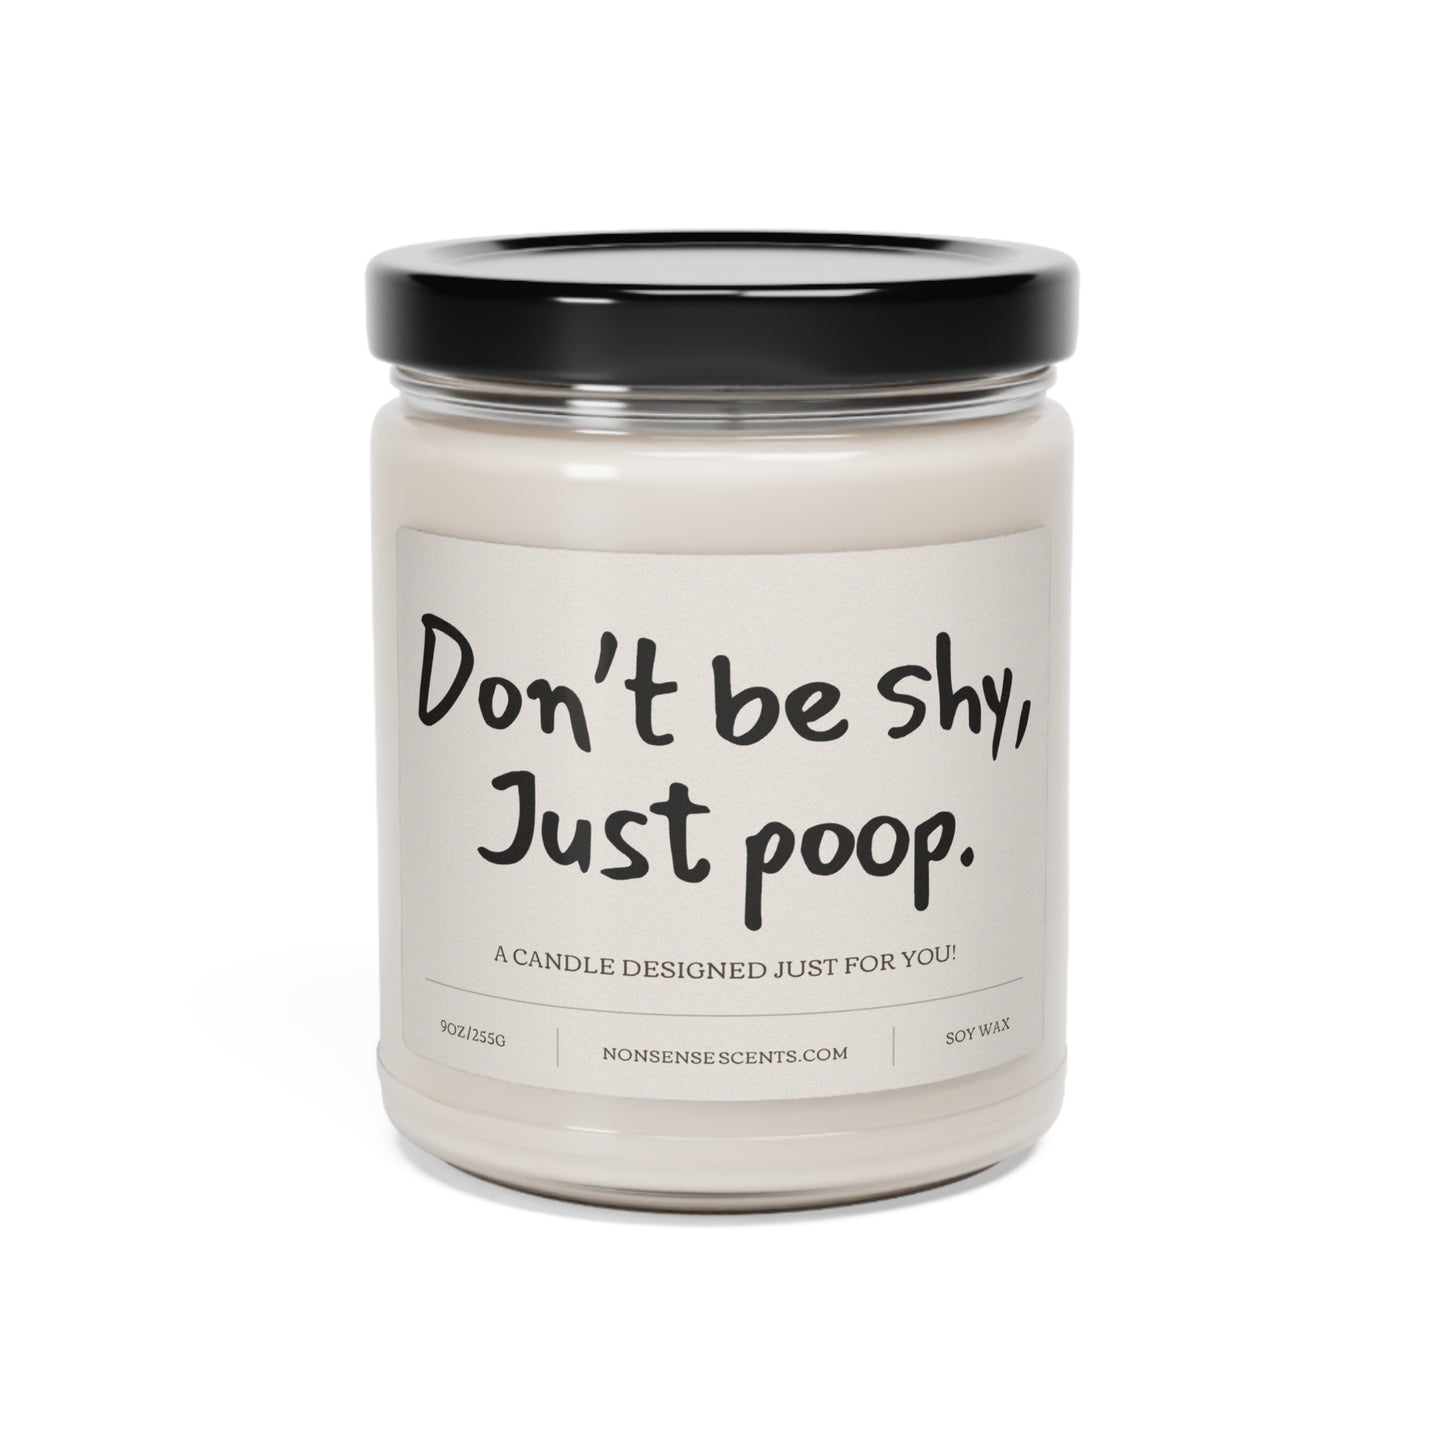 "Don't Be Shy, Just Poop" Scented Candle